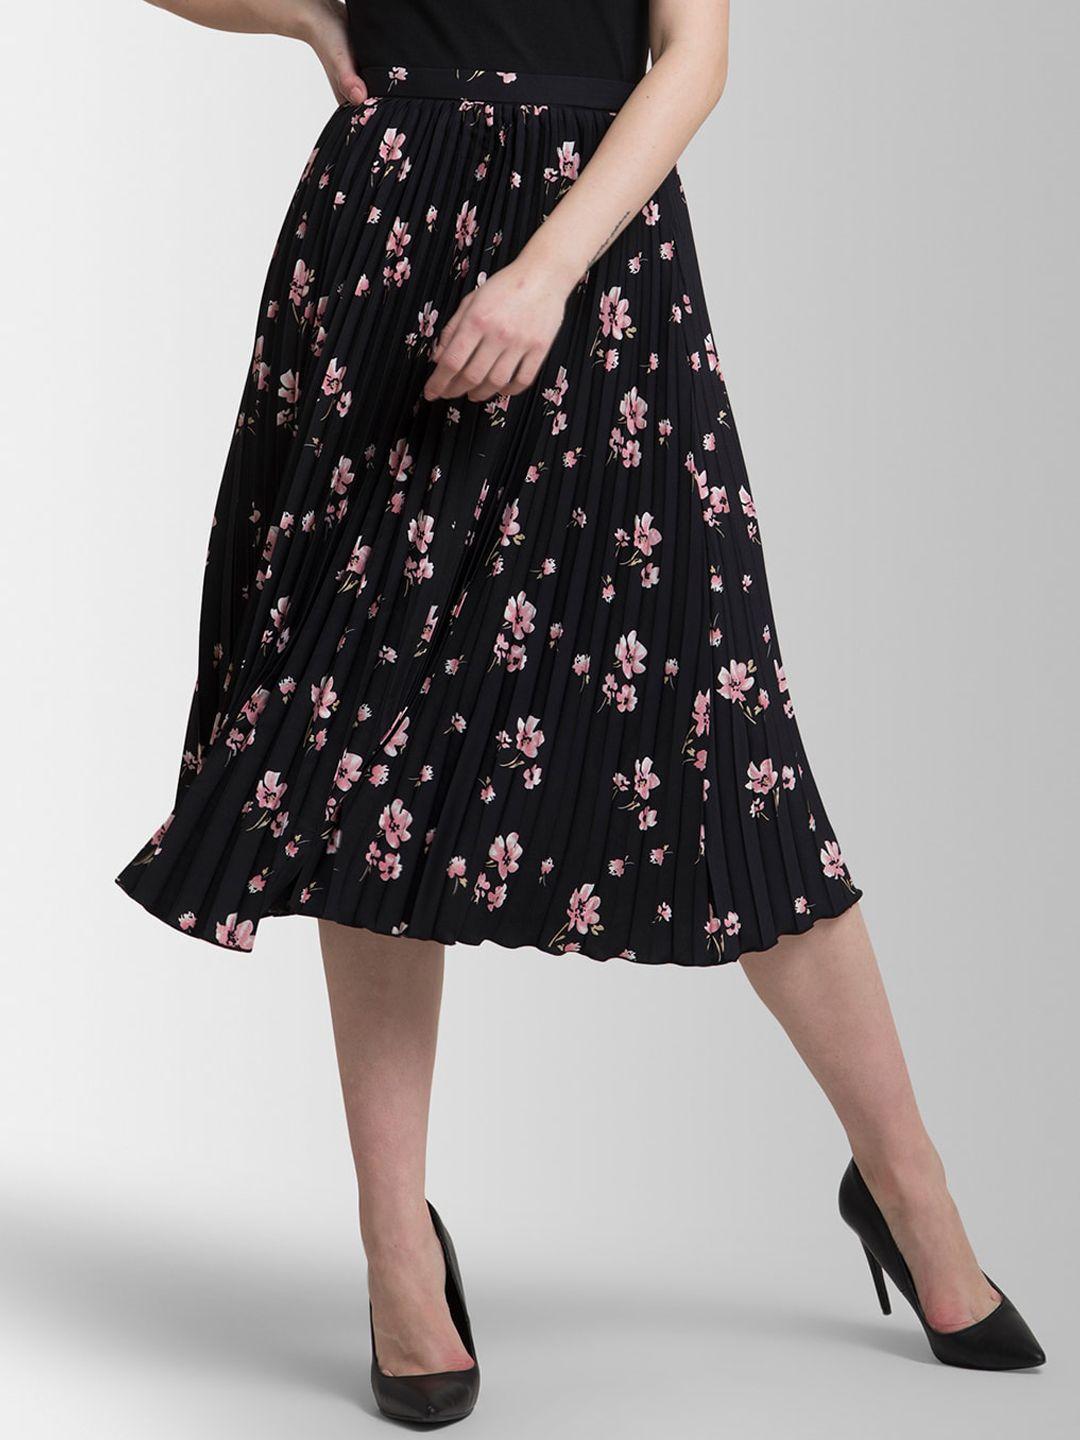 FableStreet Women Black & Pink Floral Printed Pleated A-Line Midi Skirt